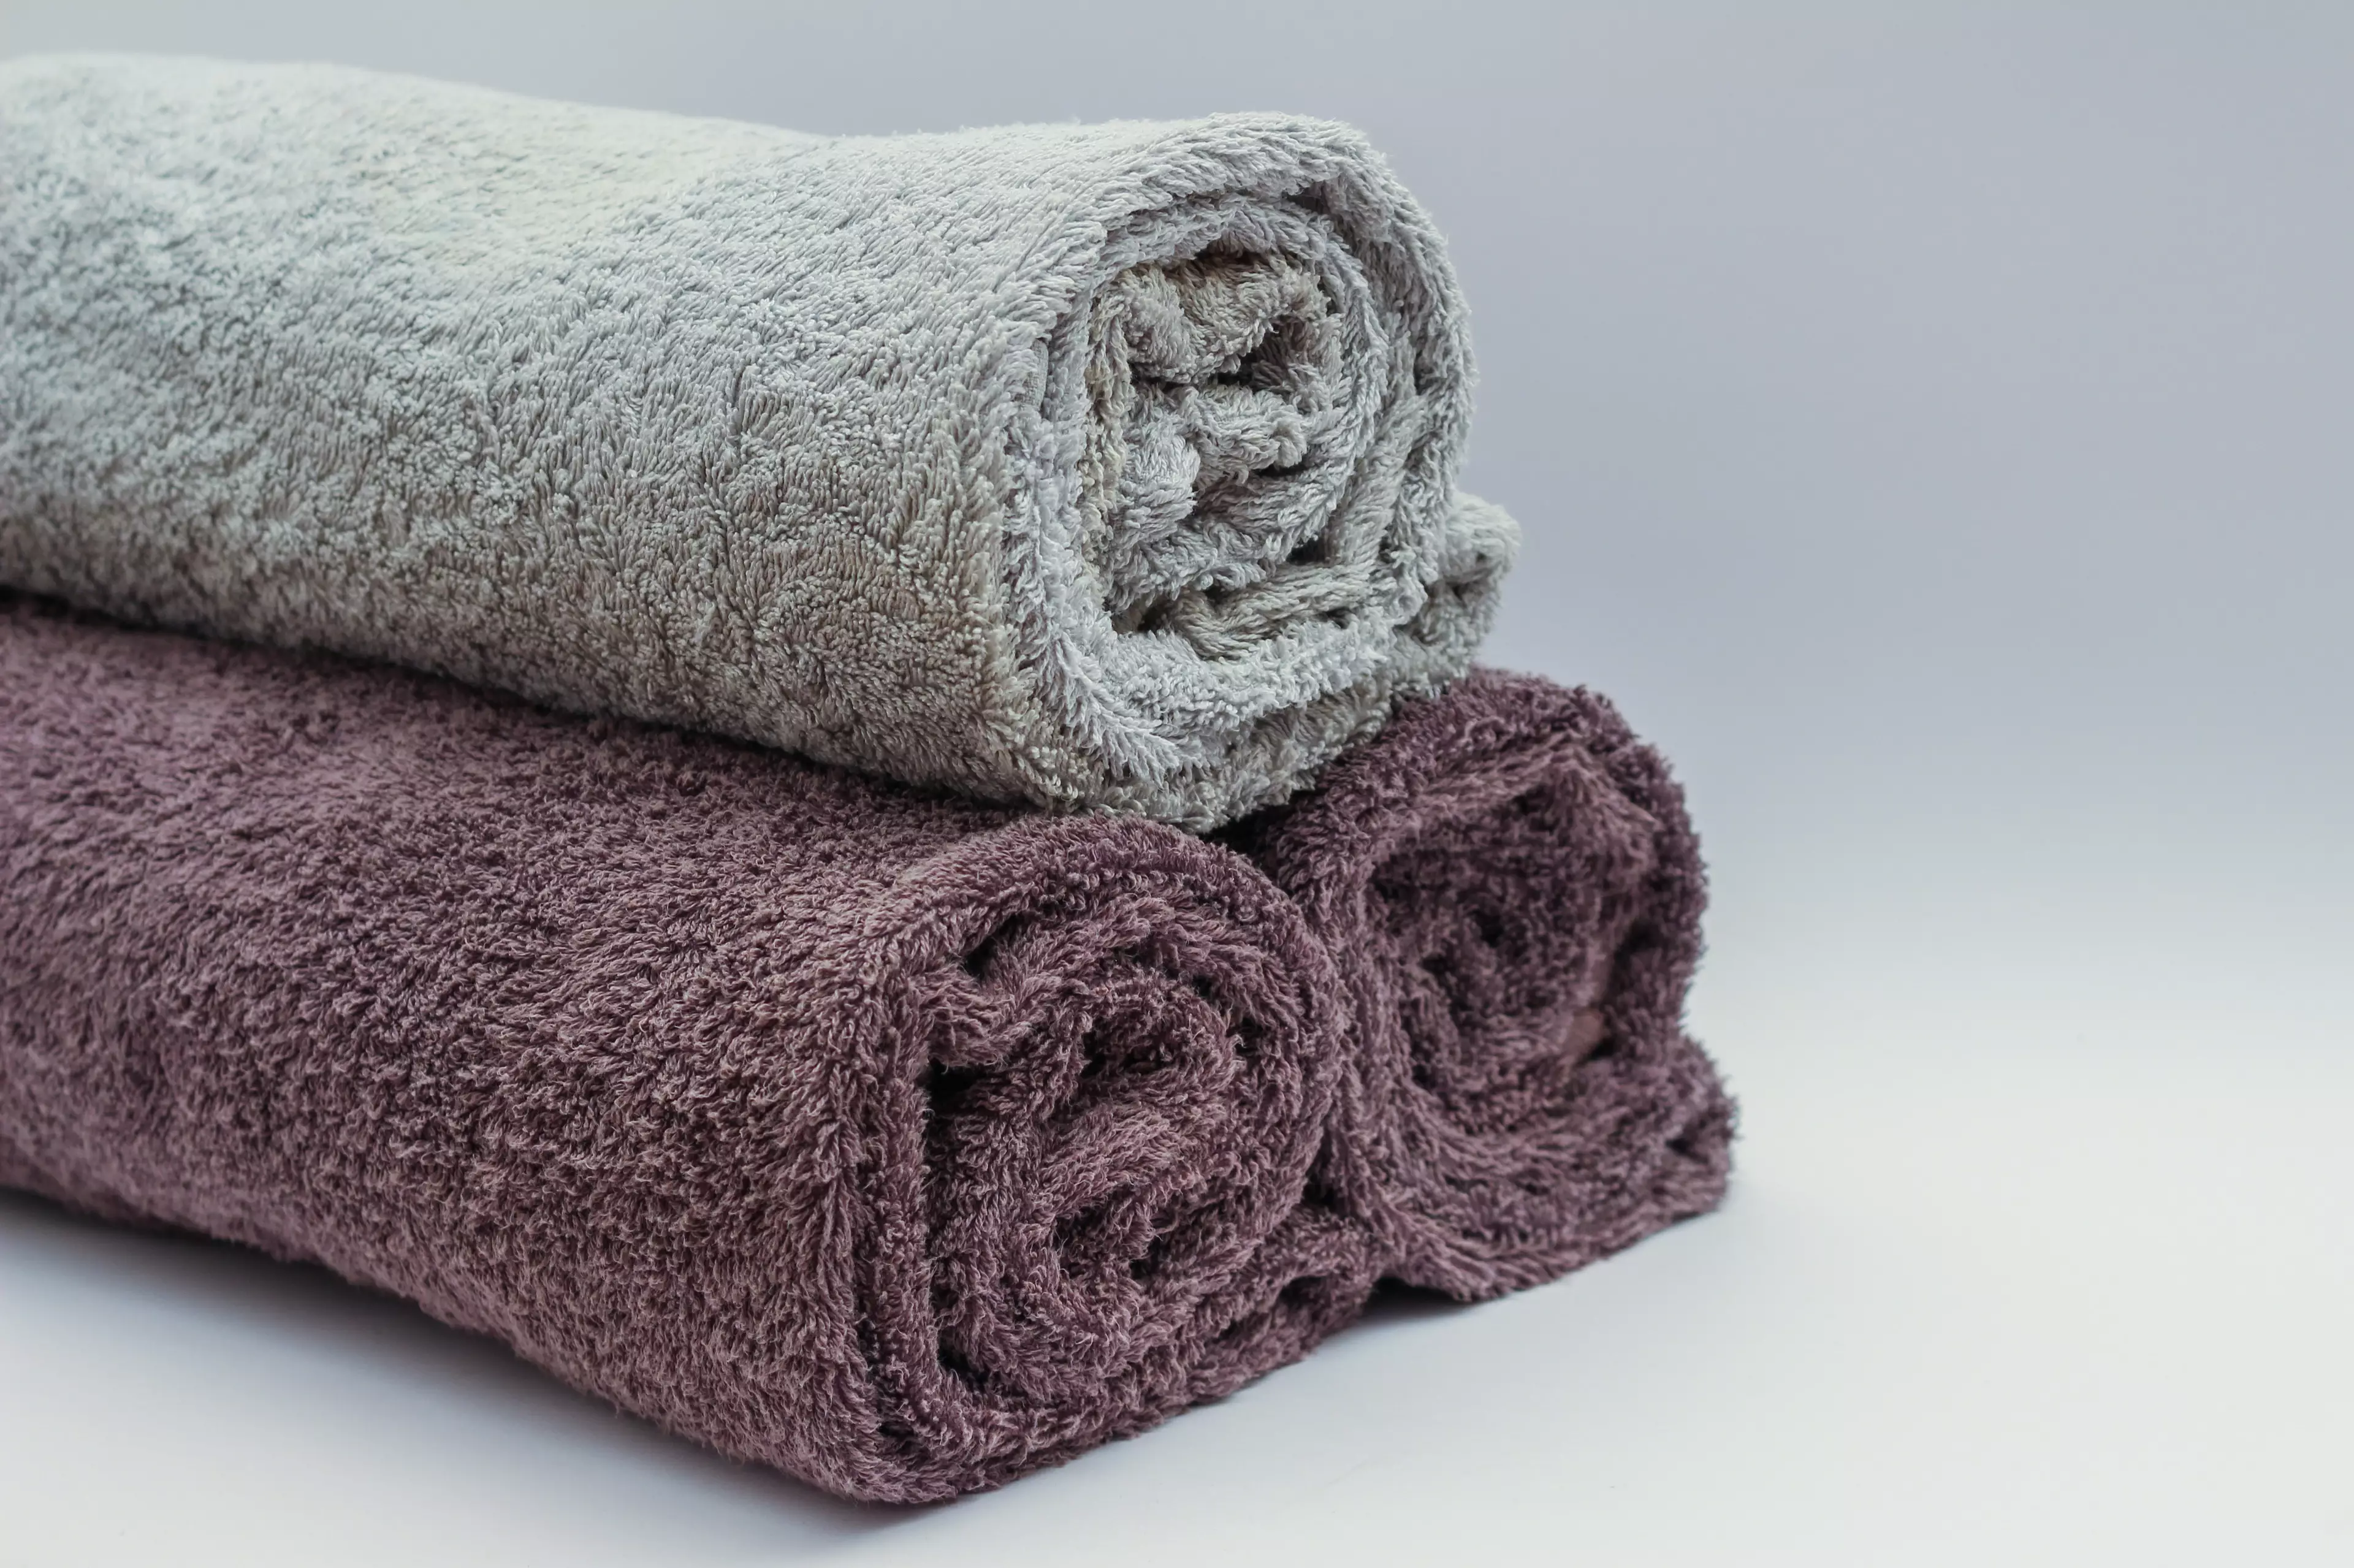 Here's how to keep your towels nice and fresh (